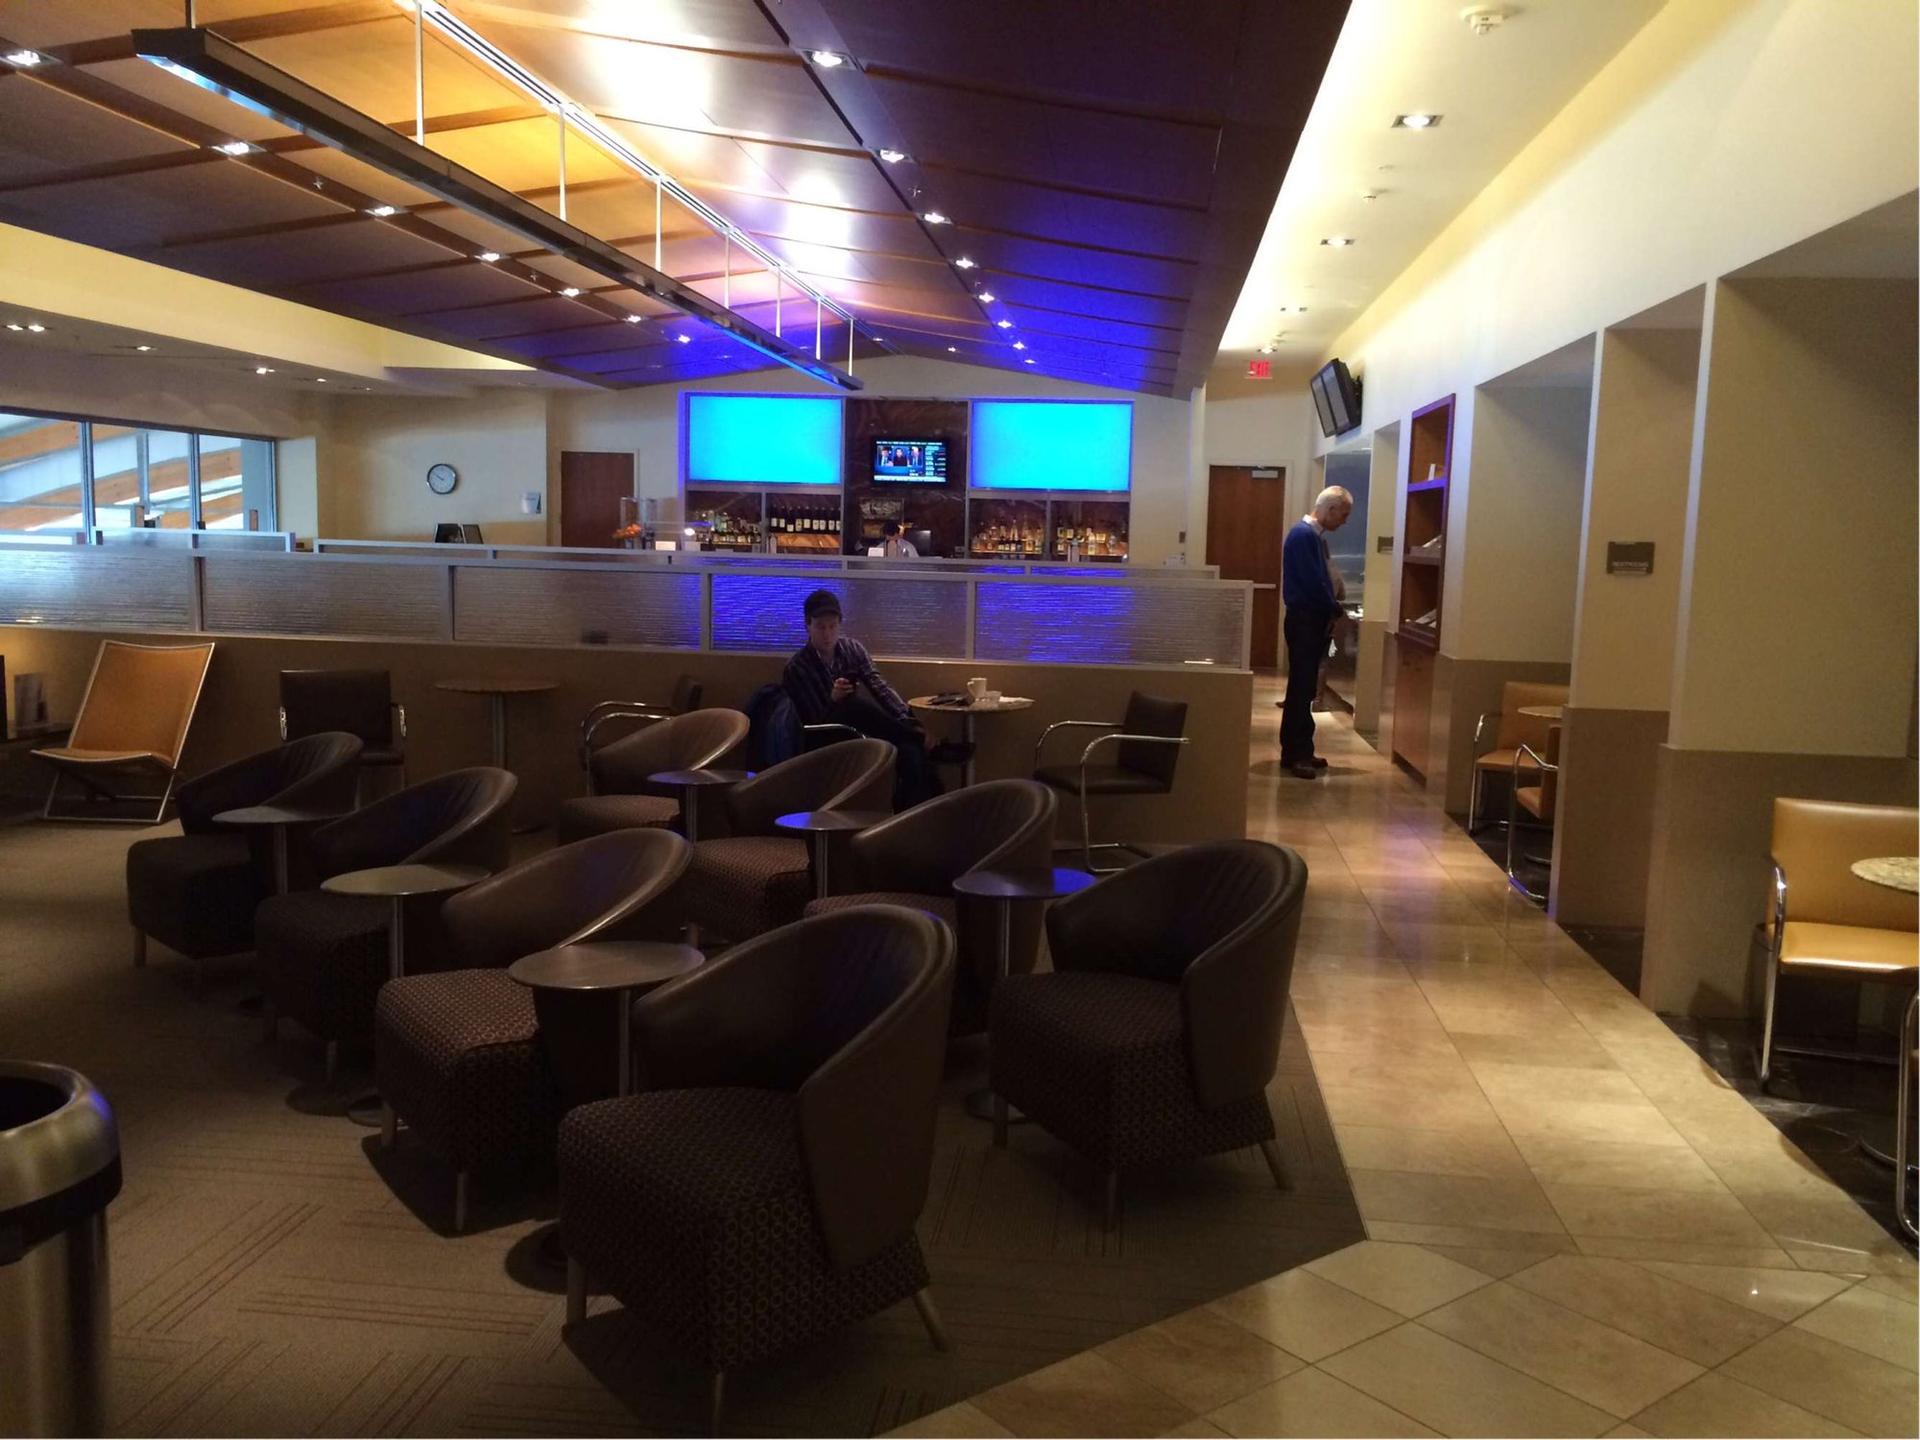 American Airlines Admirals Club image 12 of 31